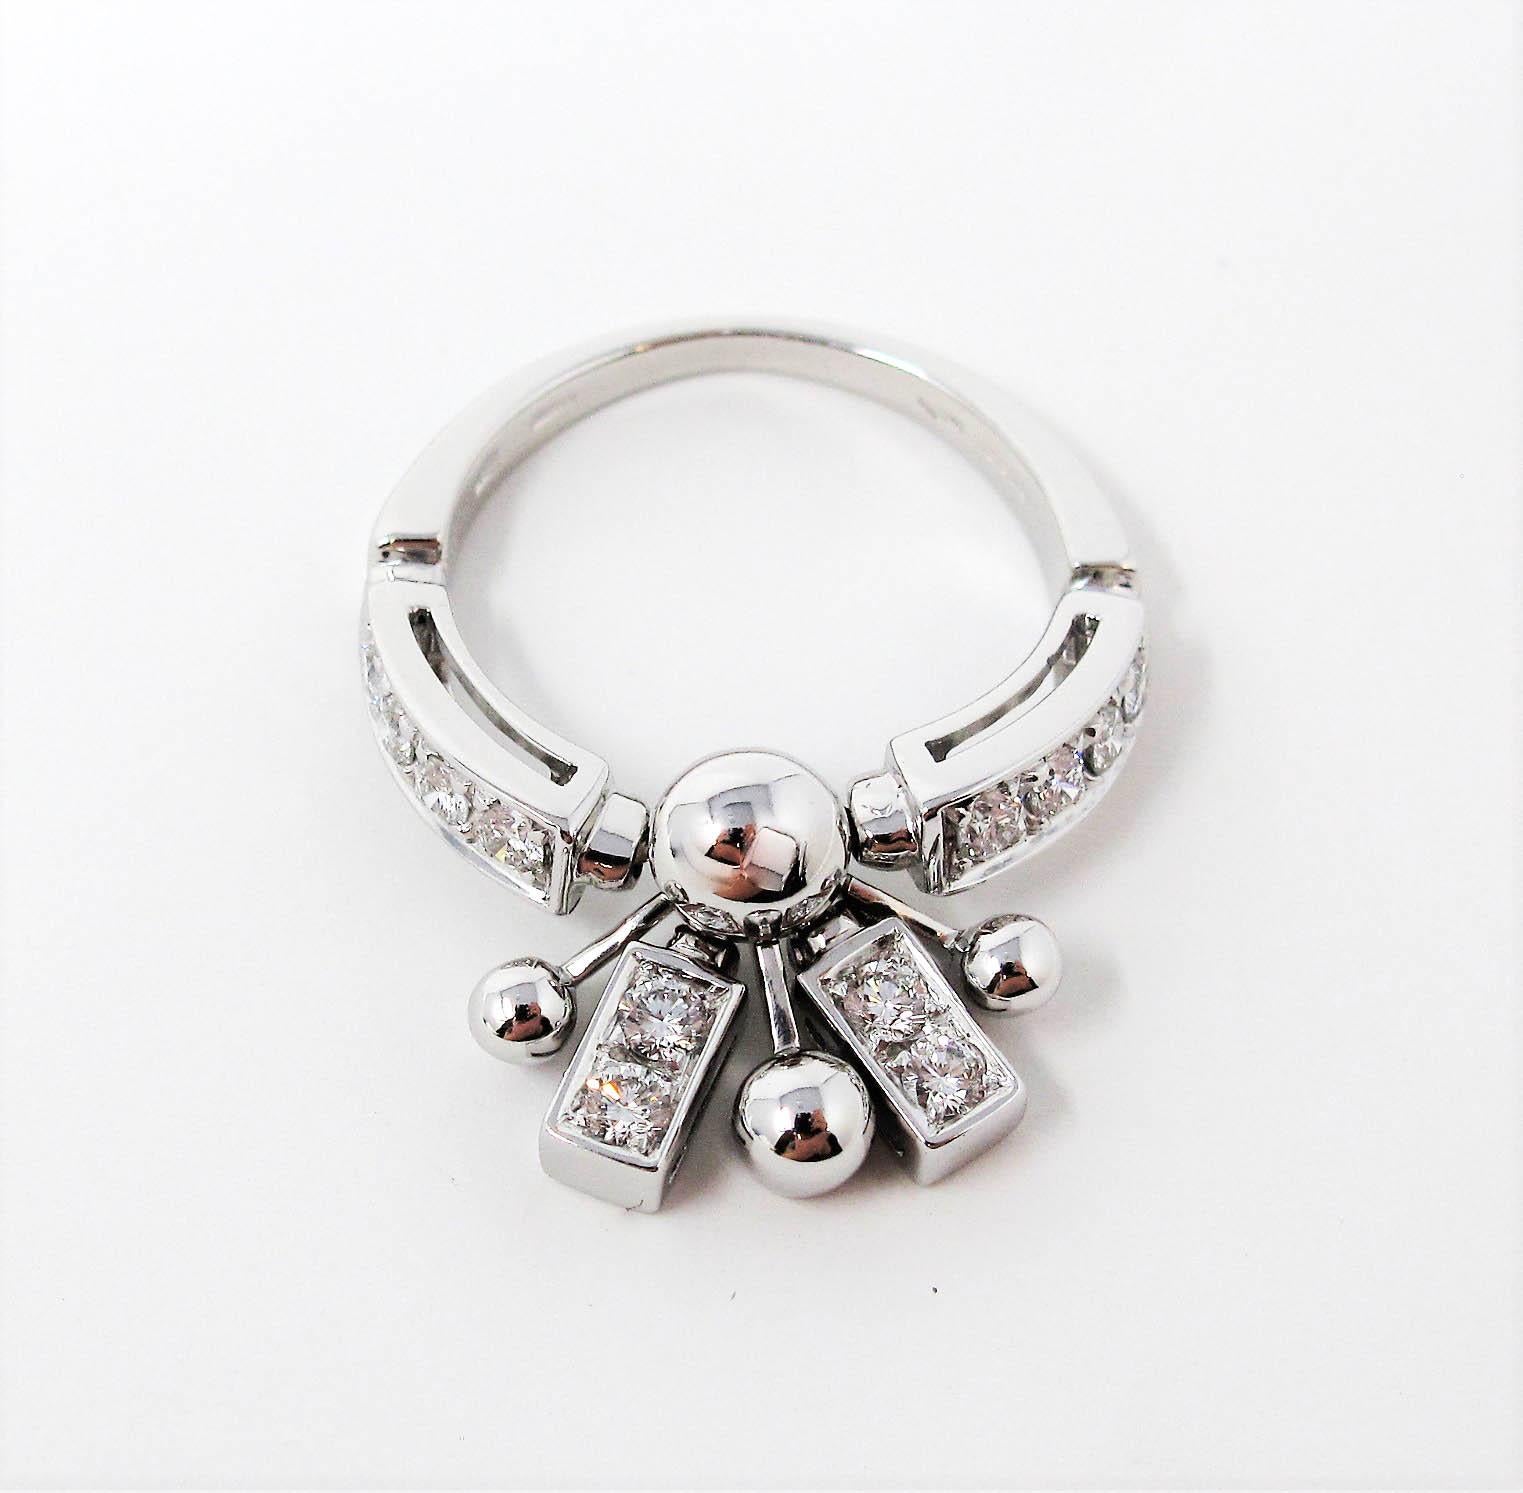 Bvlgari Astrale Fireworks Band Ring in 18 Karat White Gold with Diamonds 6.75 In Good Condition For Sale In Scottsdale, AZ